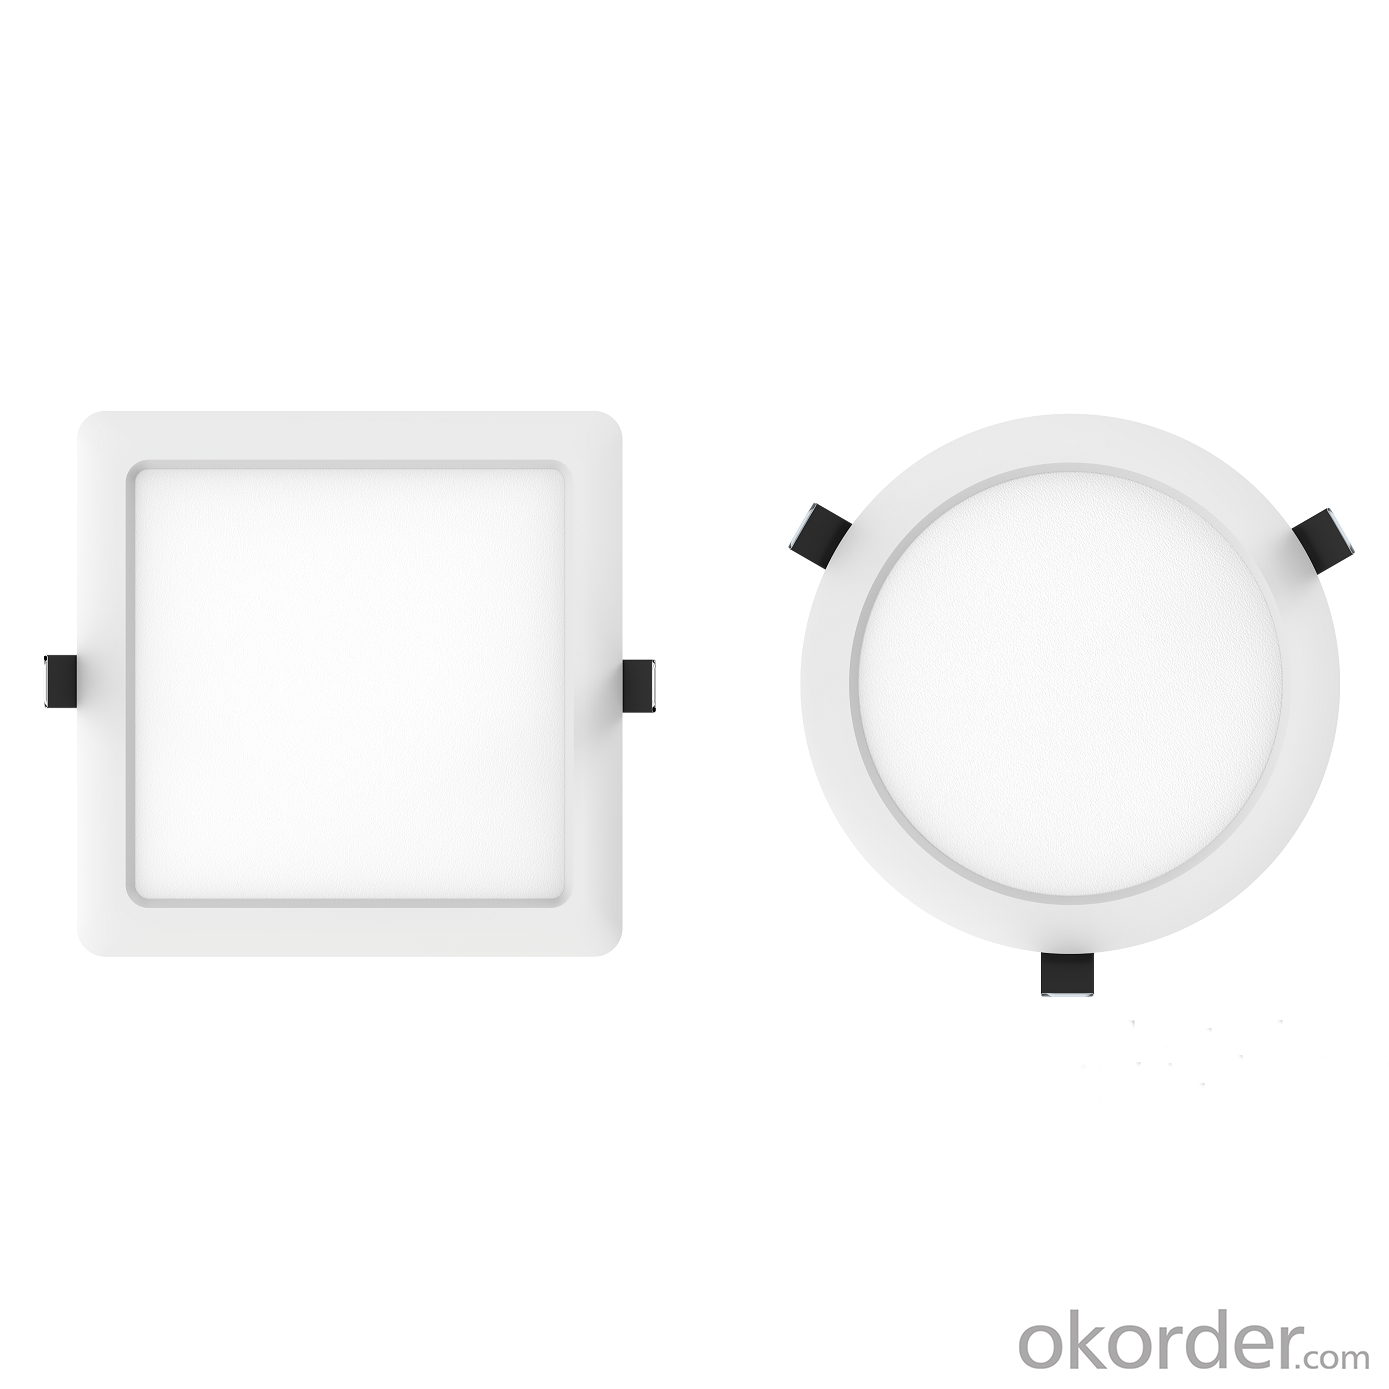 Slim and stylish design LED Downlight for Retail, home and office use